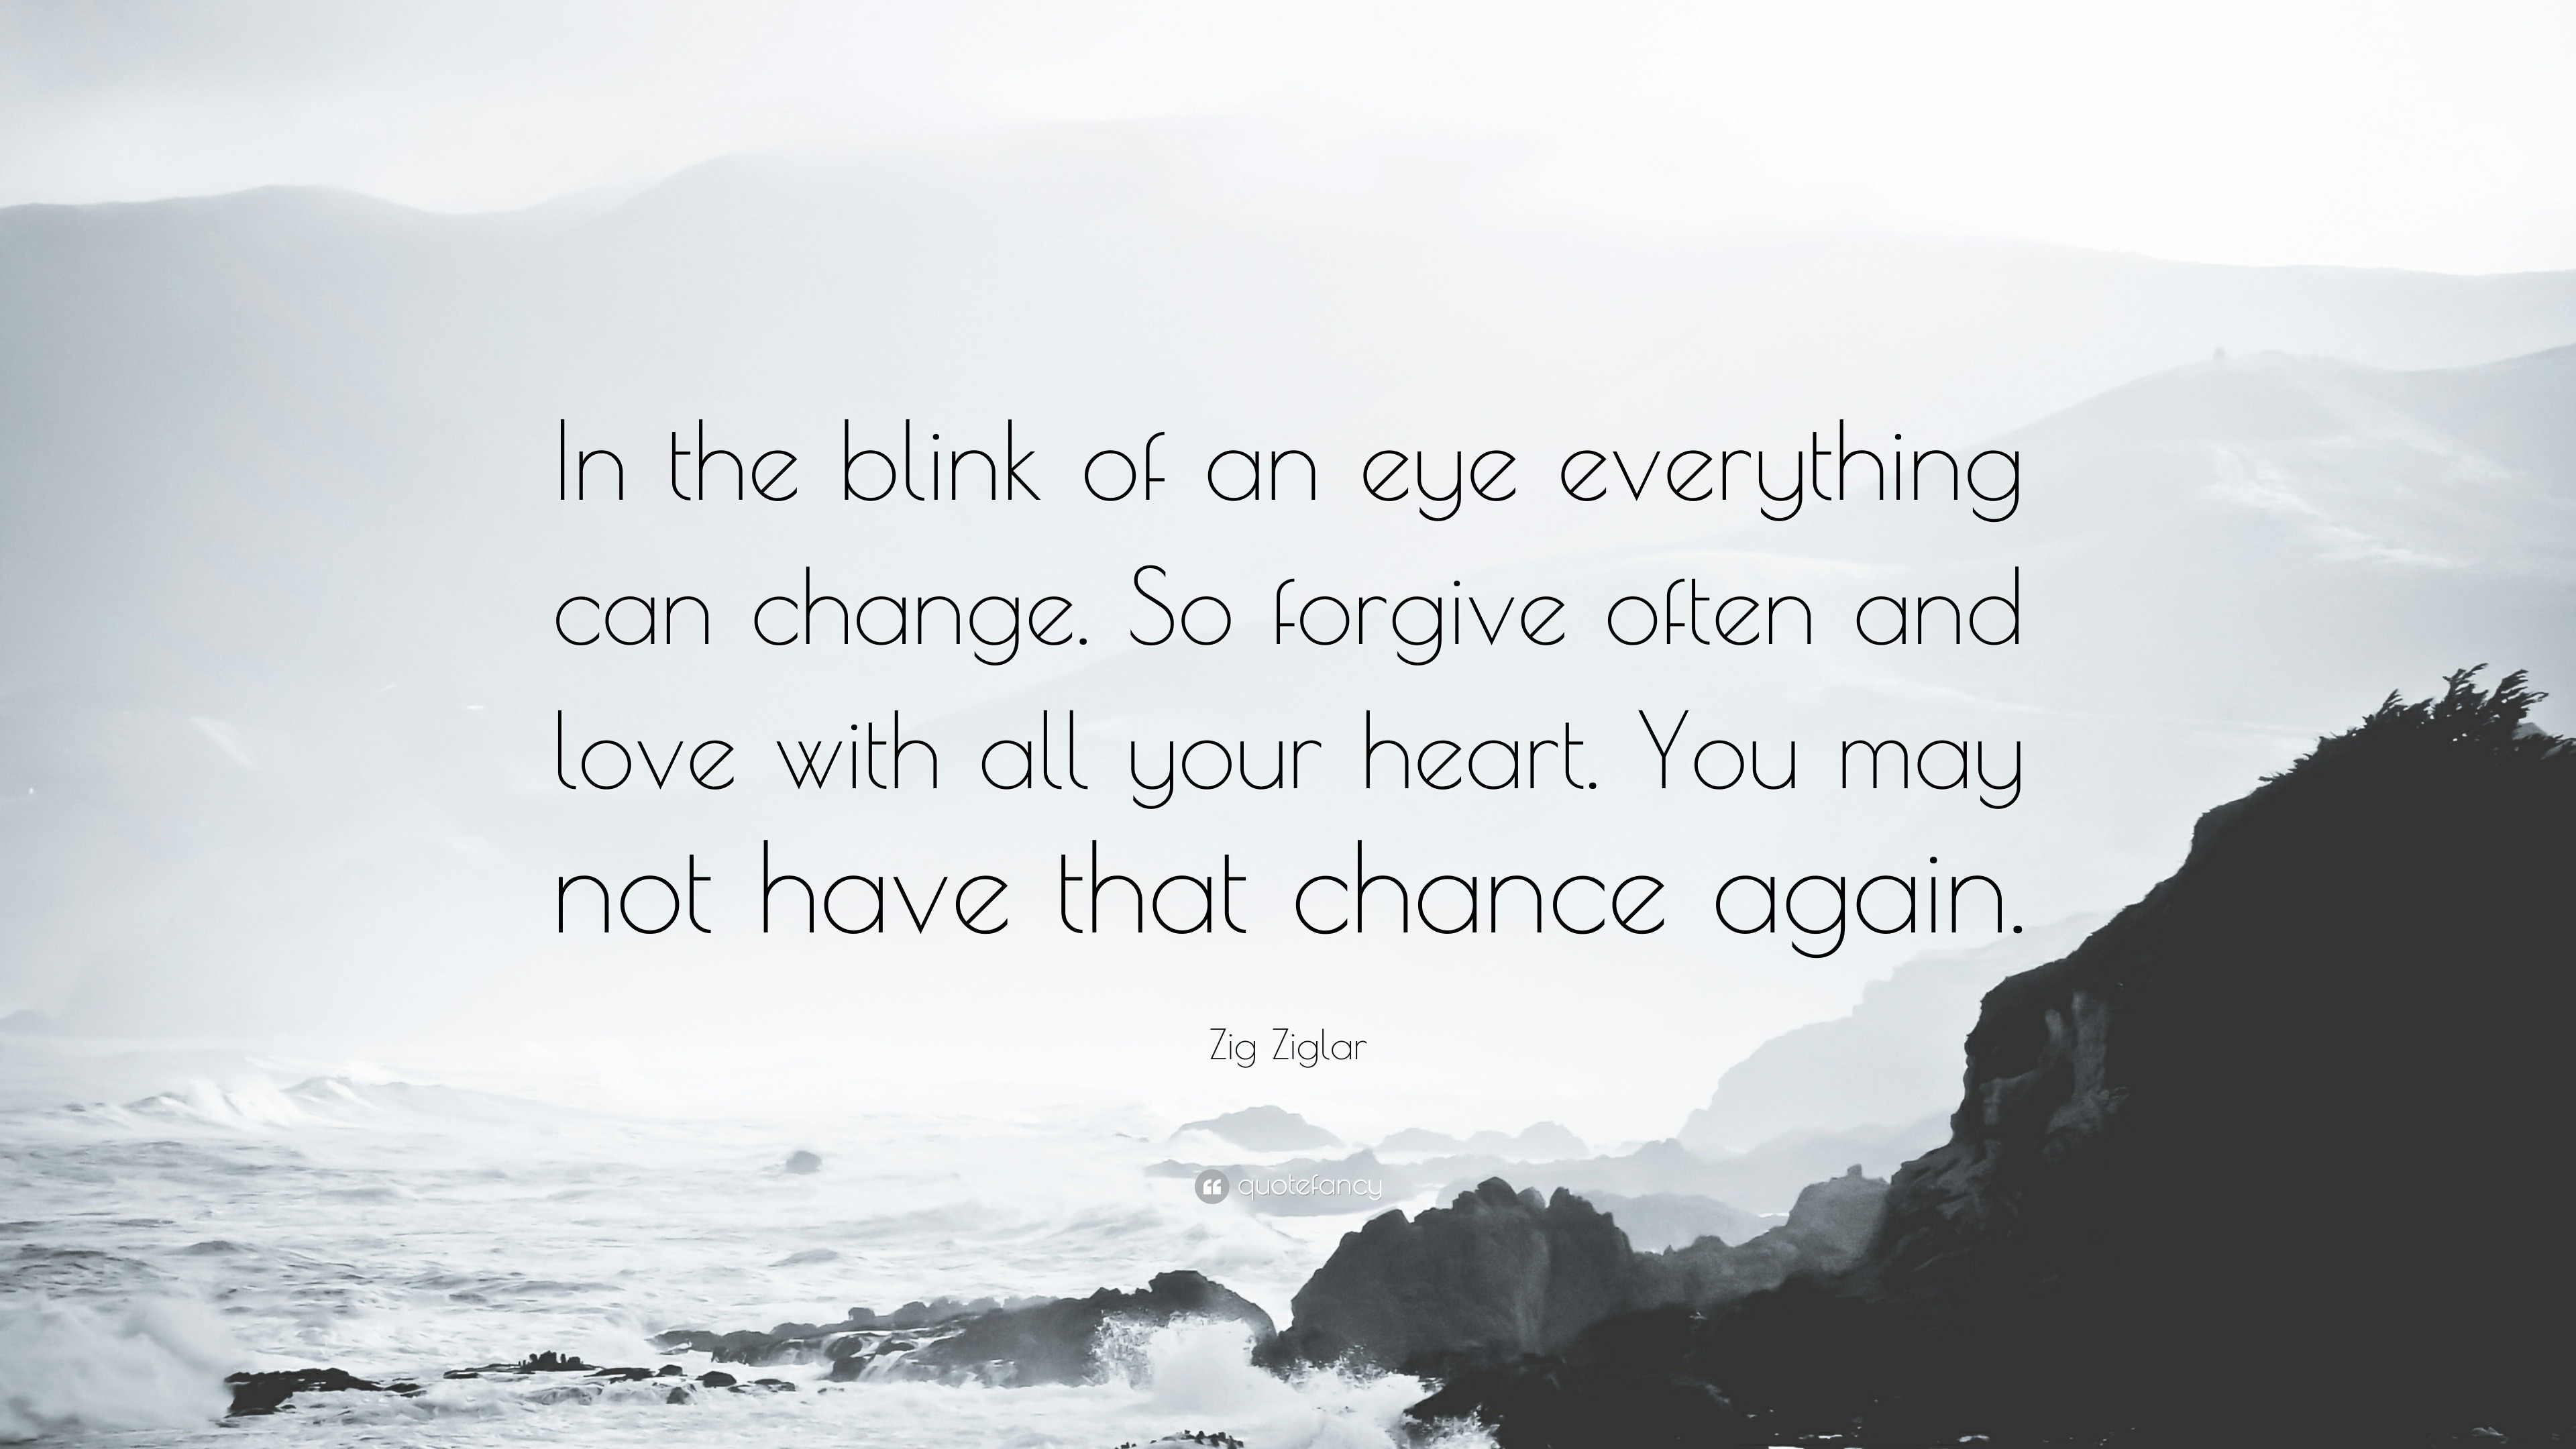 Zig Ziglar Quote: “In the blink of an eye everything can change. So